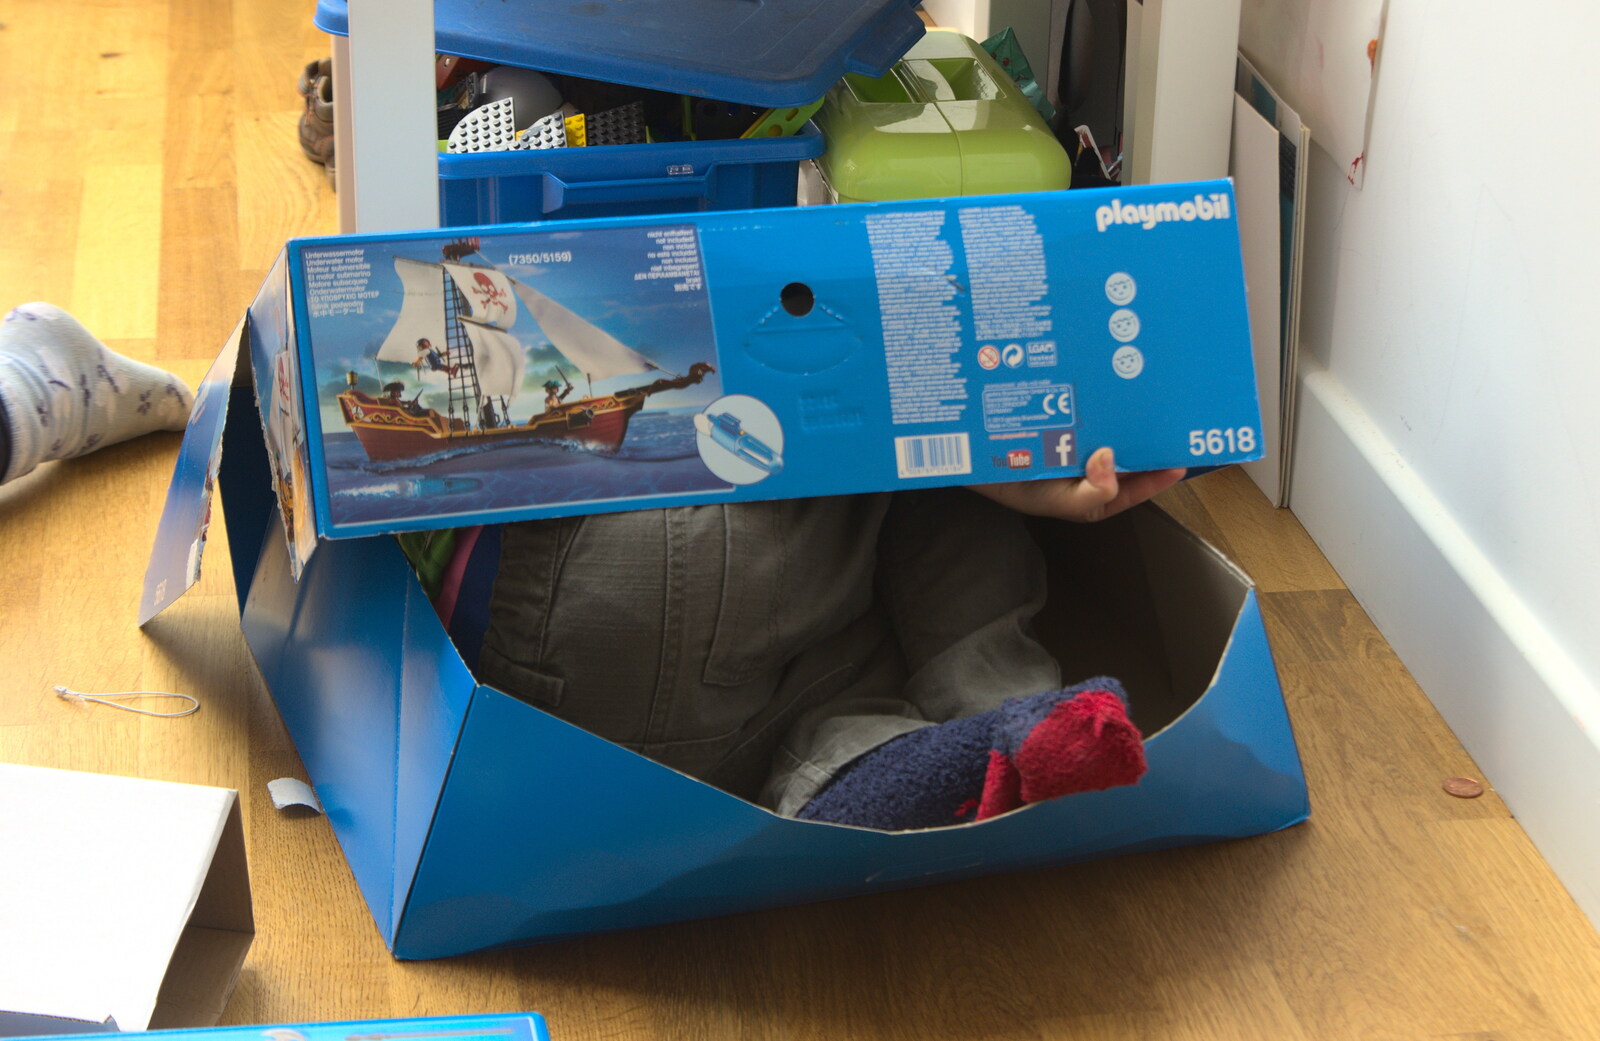 Harry hides in the Playmobil box from The Last Day of Pre-School and Beer at the Trowel and Hammer, Cotton, Suffolk - 29th March 2015